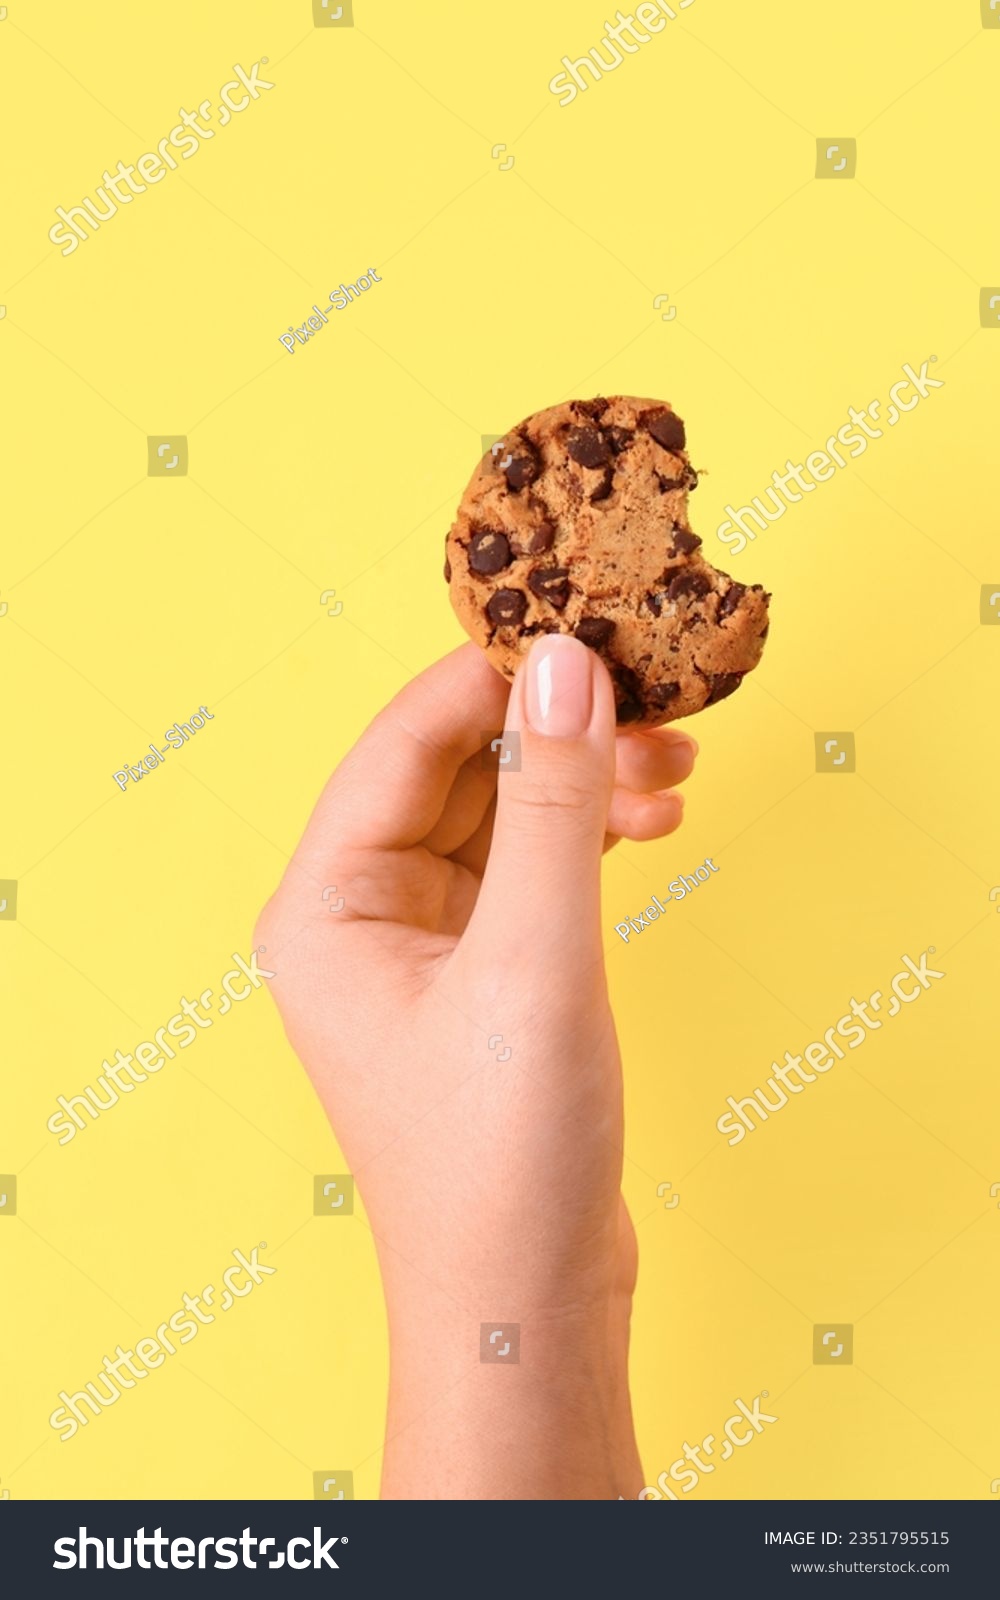 Woman holding bitten cookie with chocolate chips on yellow background #2351795515